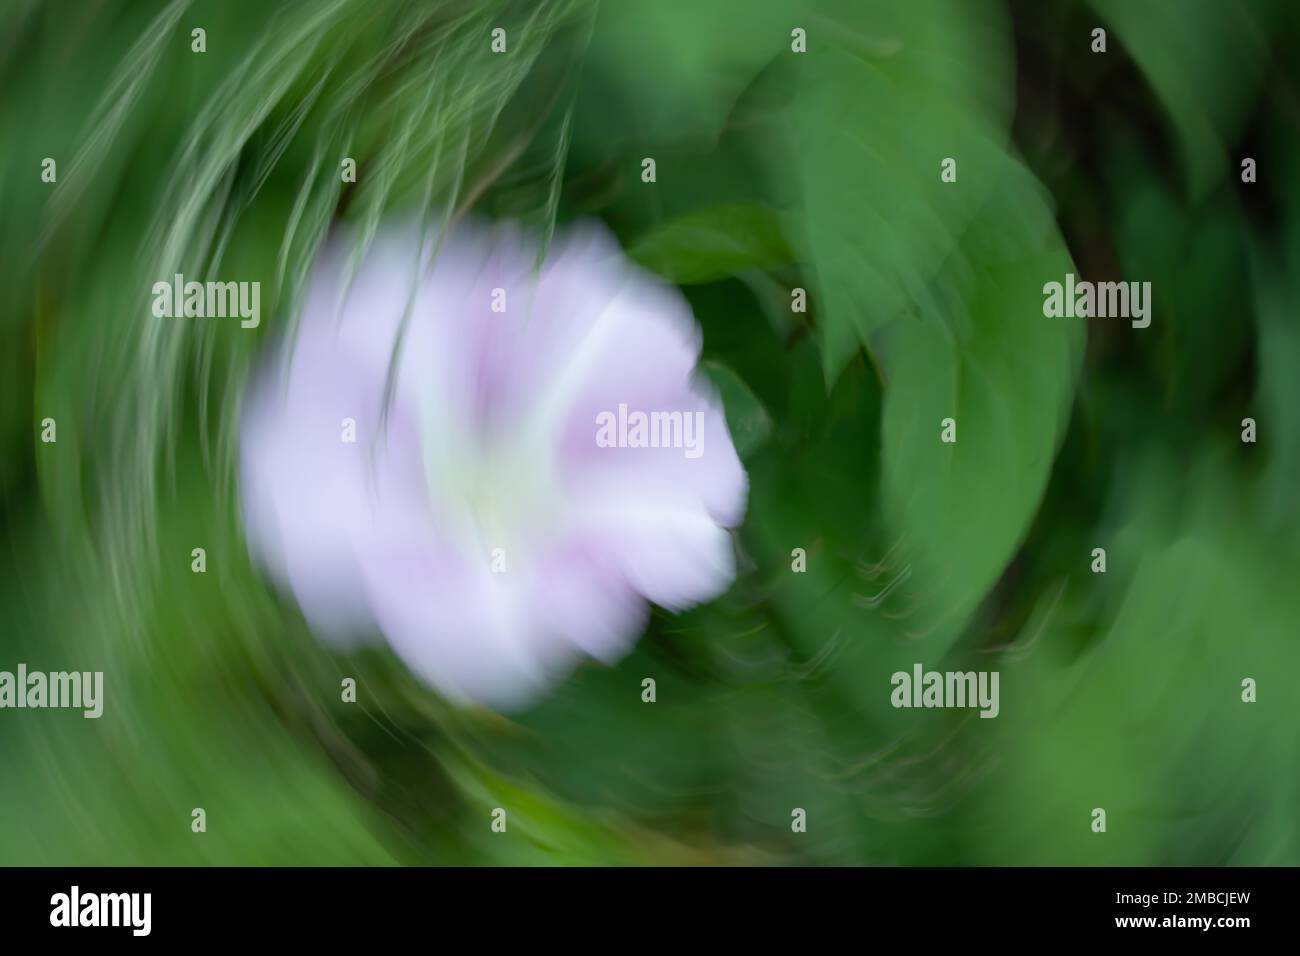 Morning glory abstract background blues and green Stock Photo